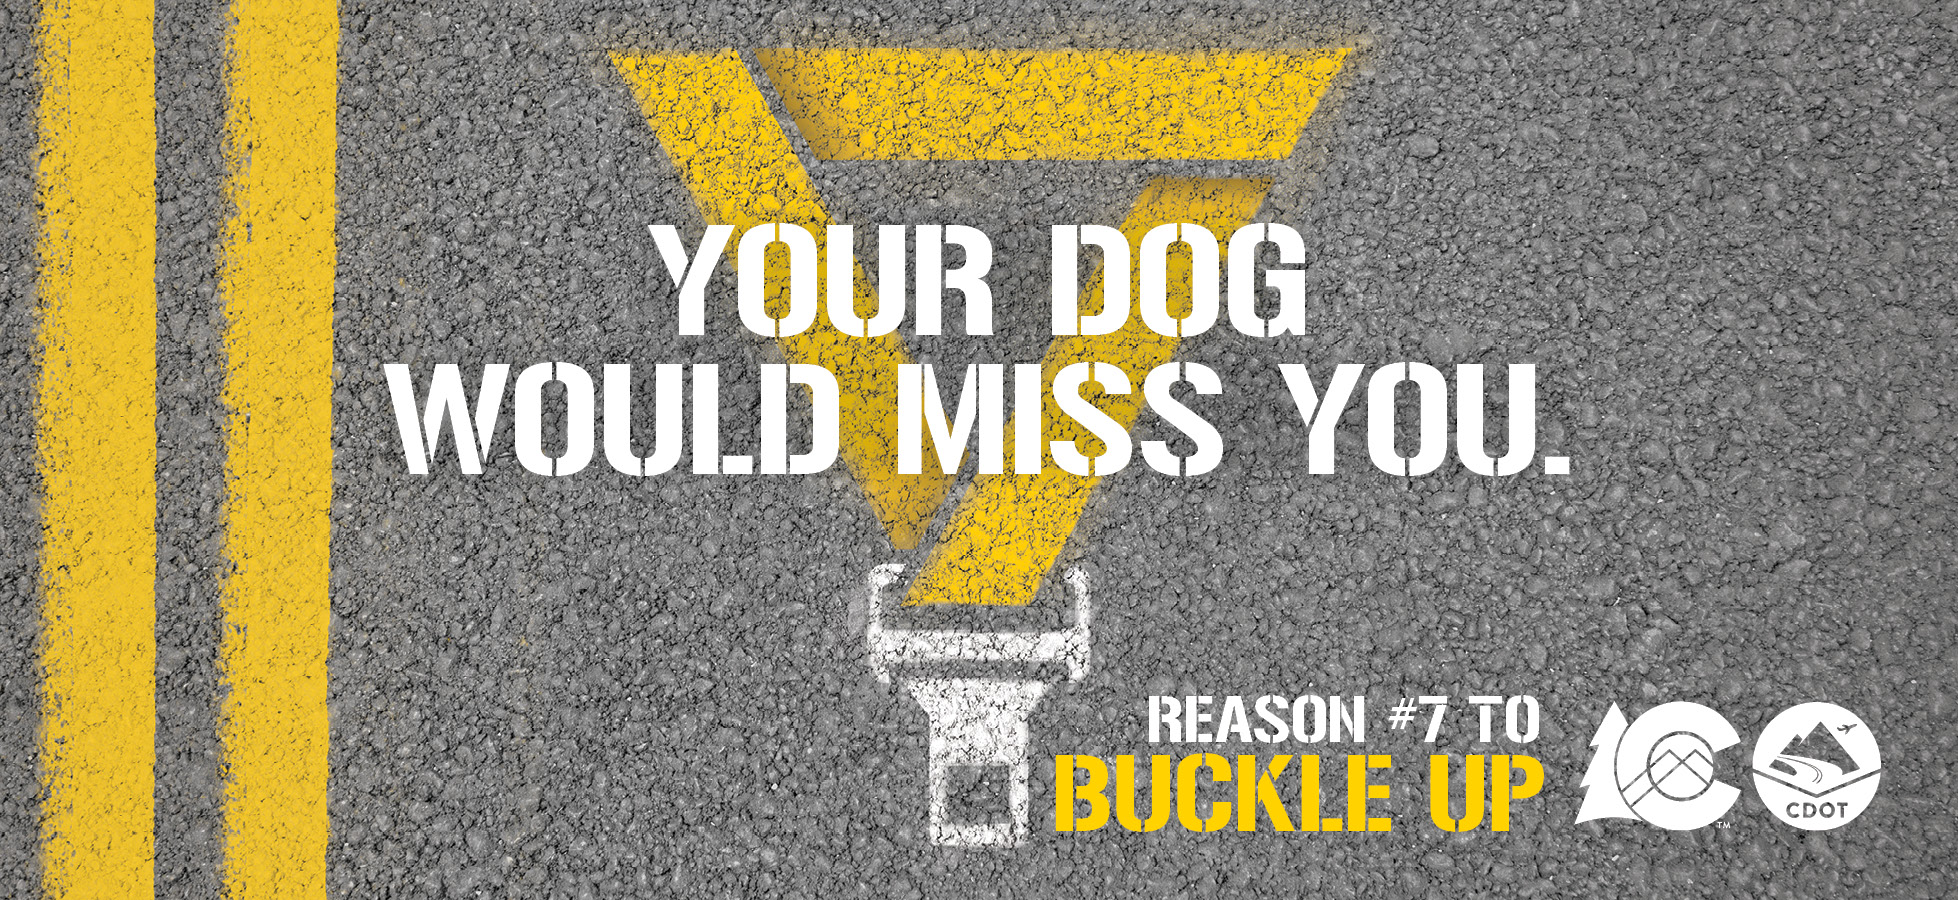 Reason #7 To Buckle Up Graphic detail image